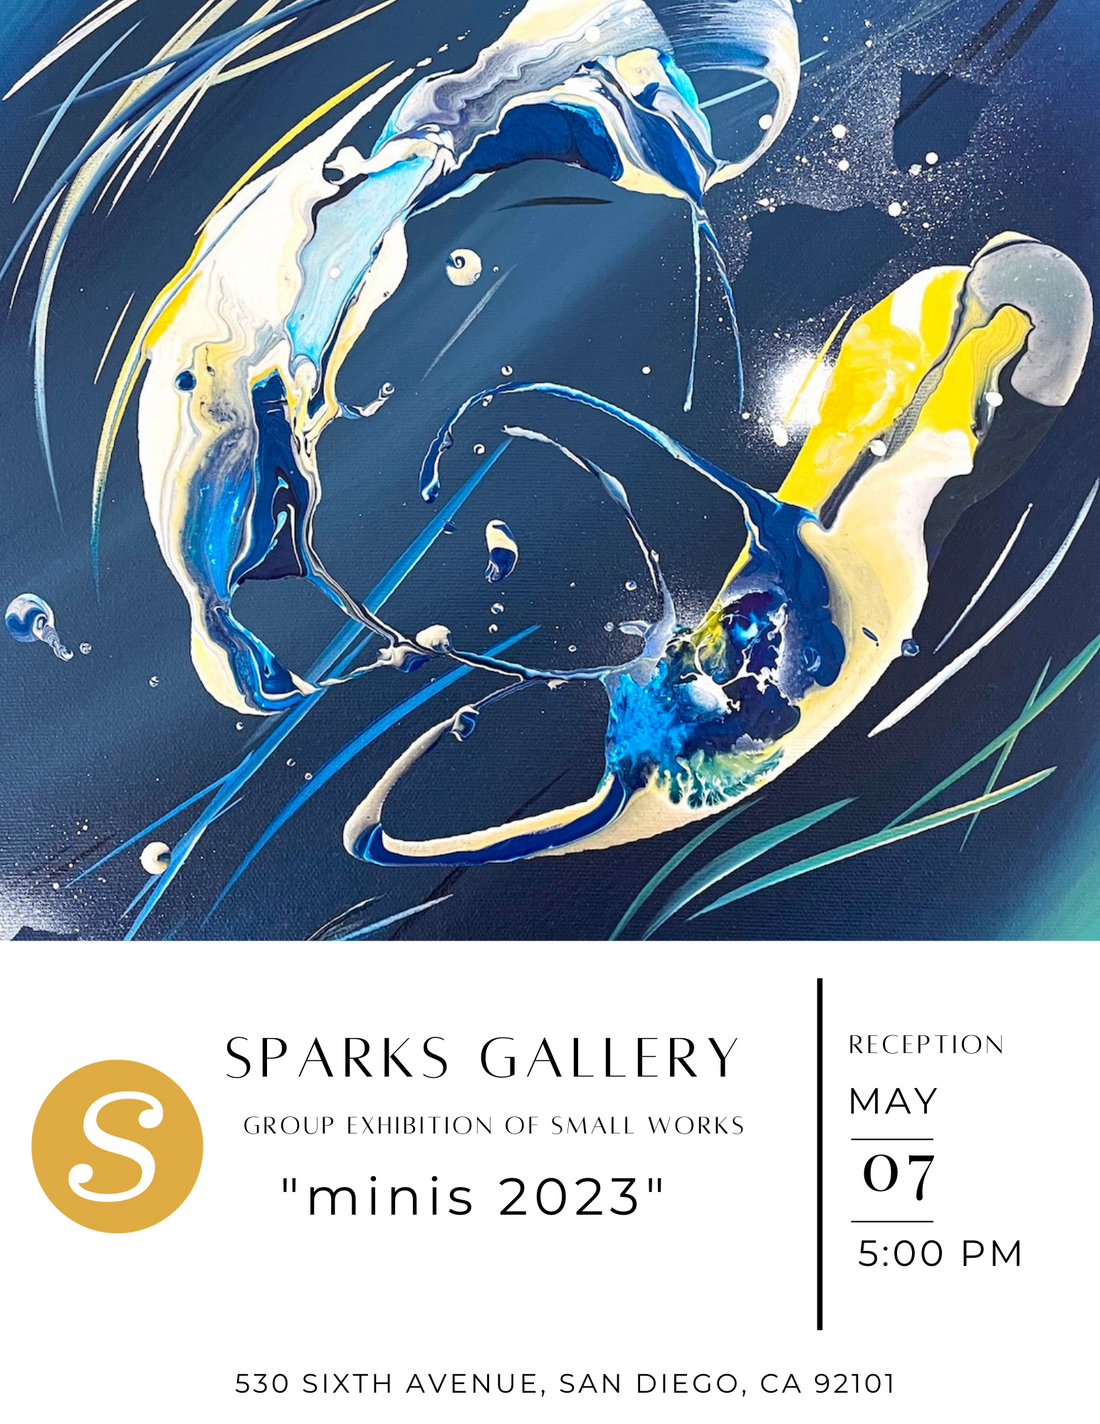 Michael Carini art on exhibit at Sparks Gallery in the Gaslamp district near the heart of Downtown San Diego